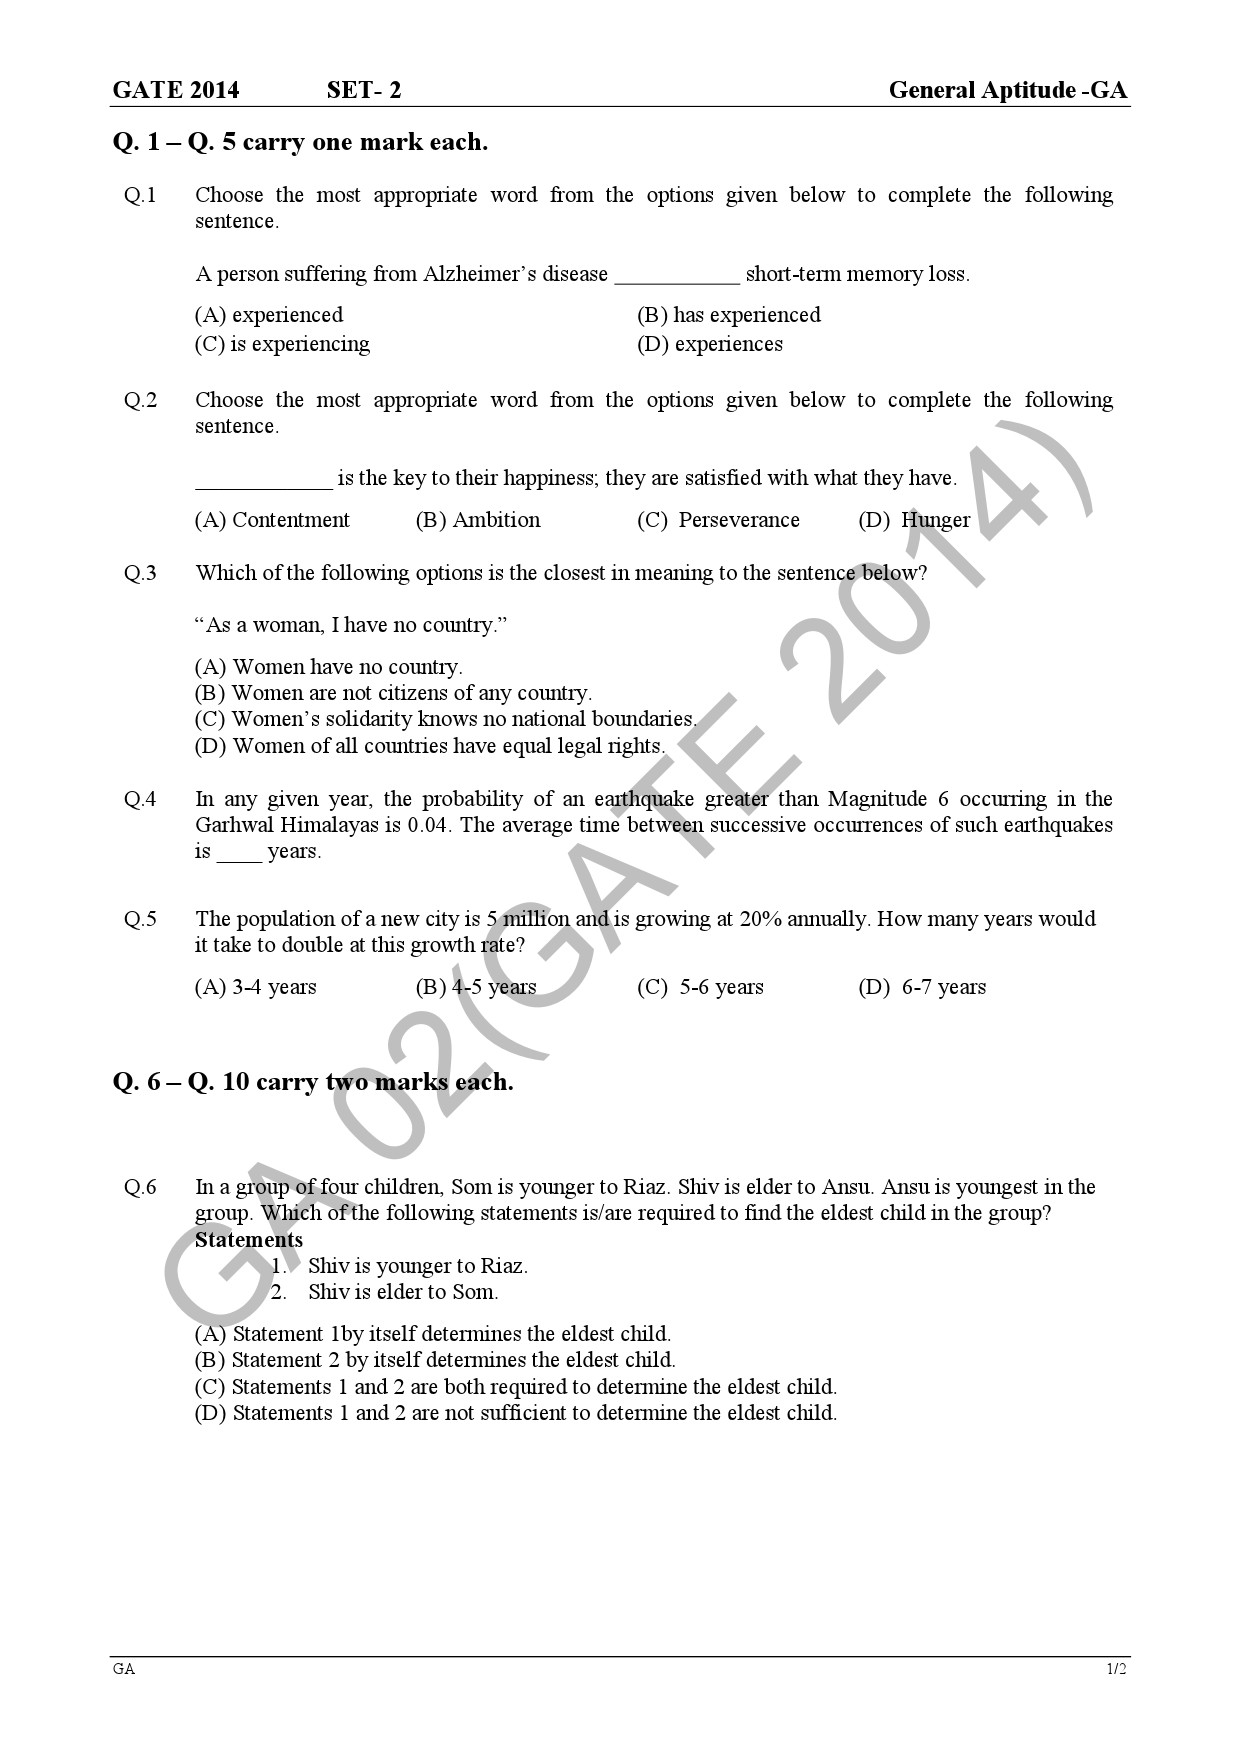 GATE Exam Question Paper 2014 Textile Engineering and Fibre Science 5